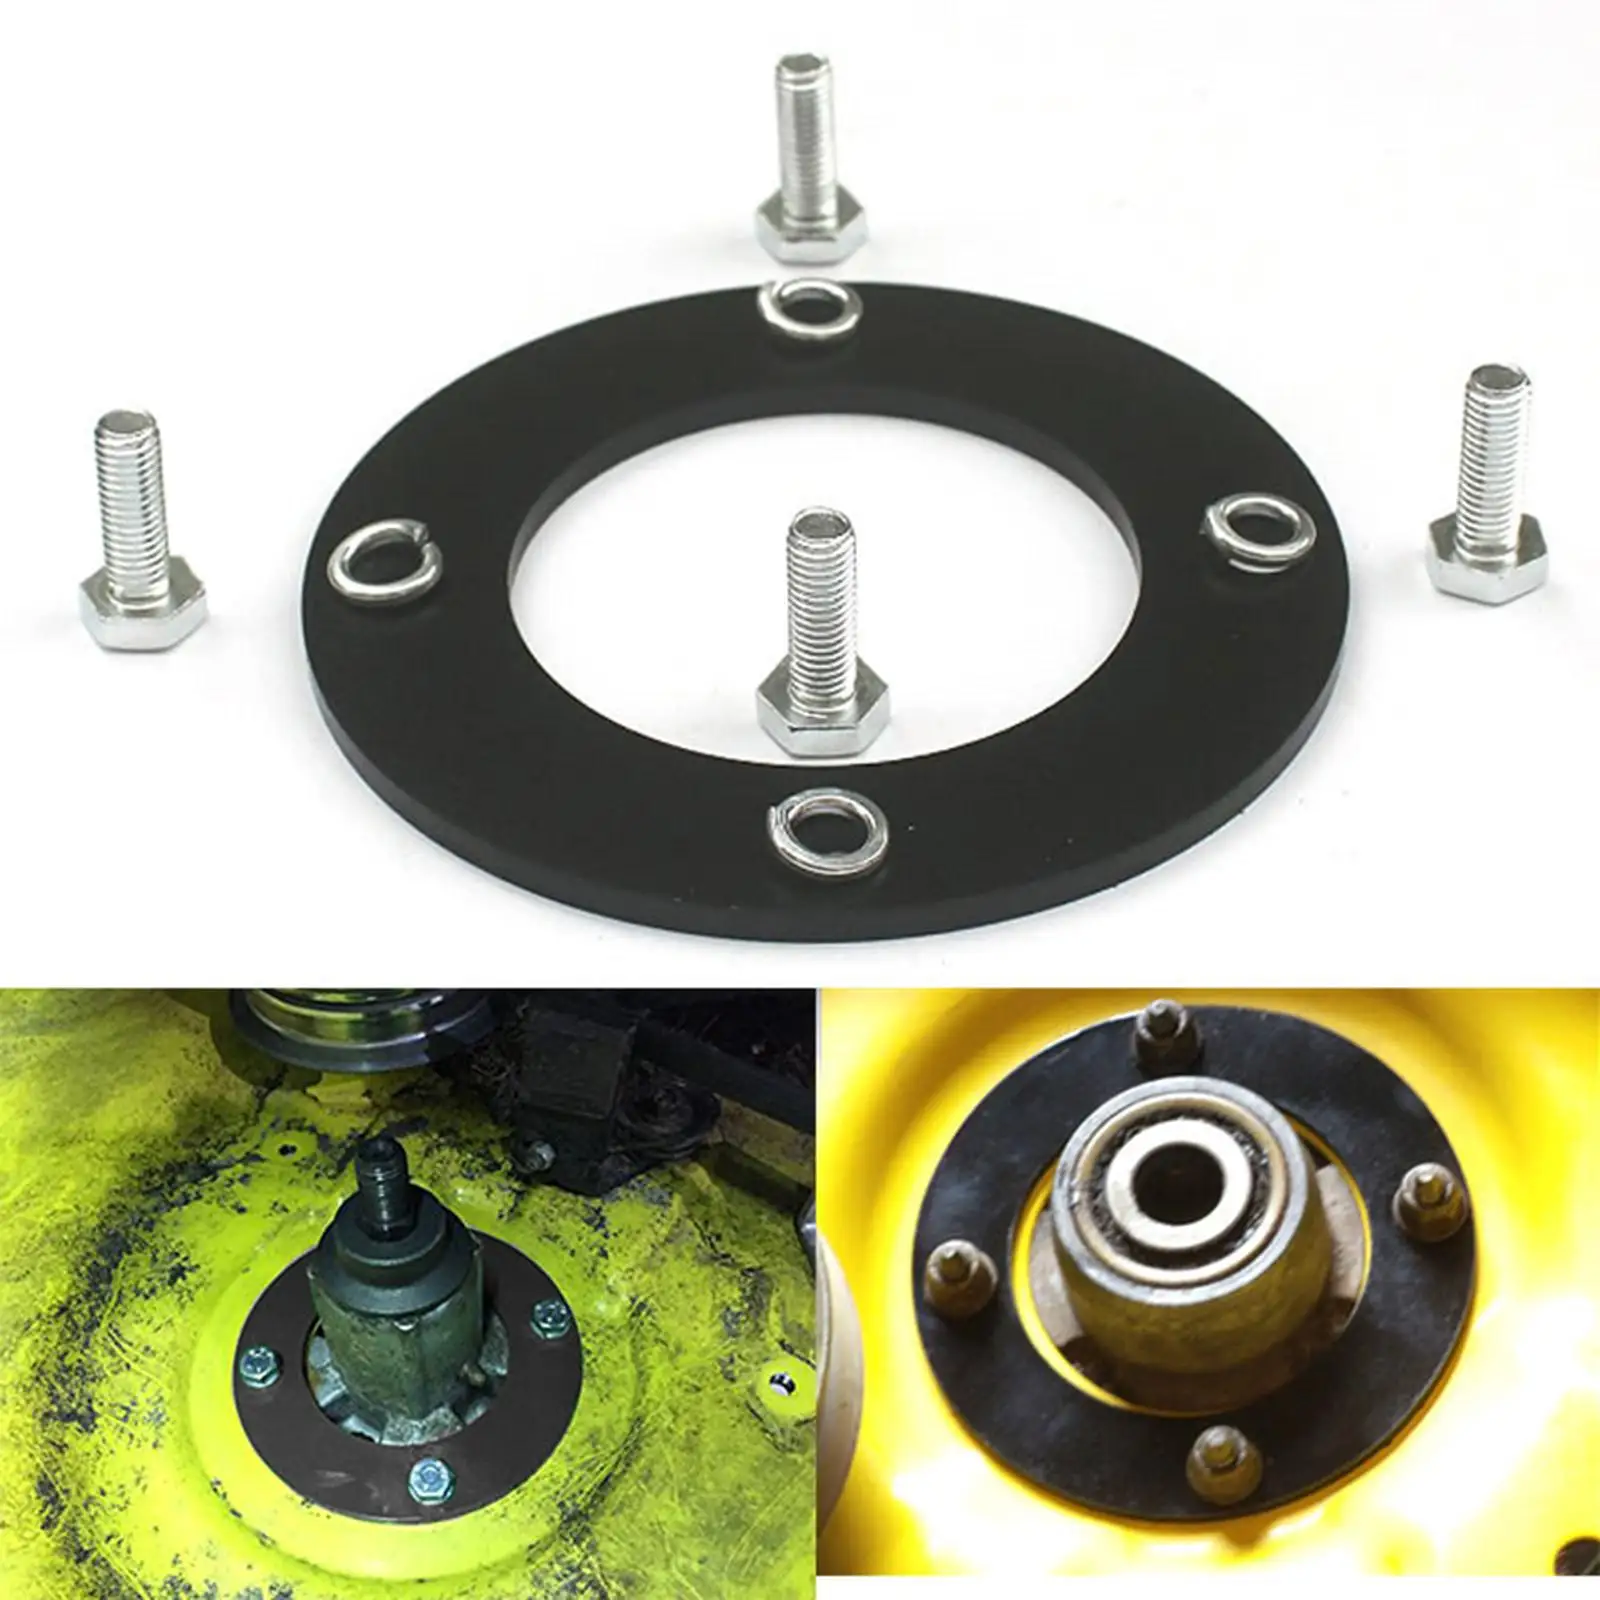 3/16 inch Plate Steel Deck Spindle Repair Ring Lawn Mower Engine Parts with Bolt Garden Tool for 42